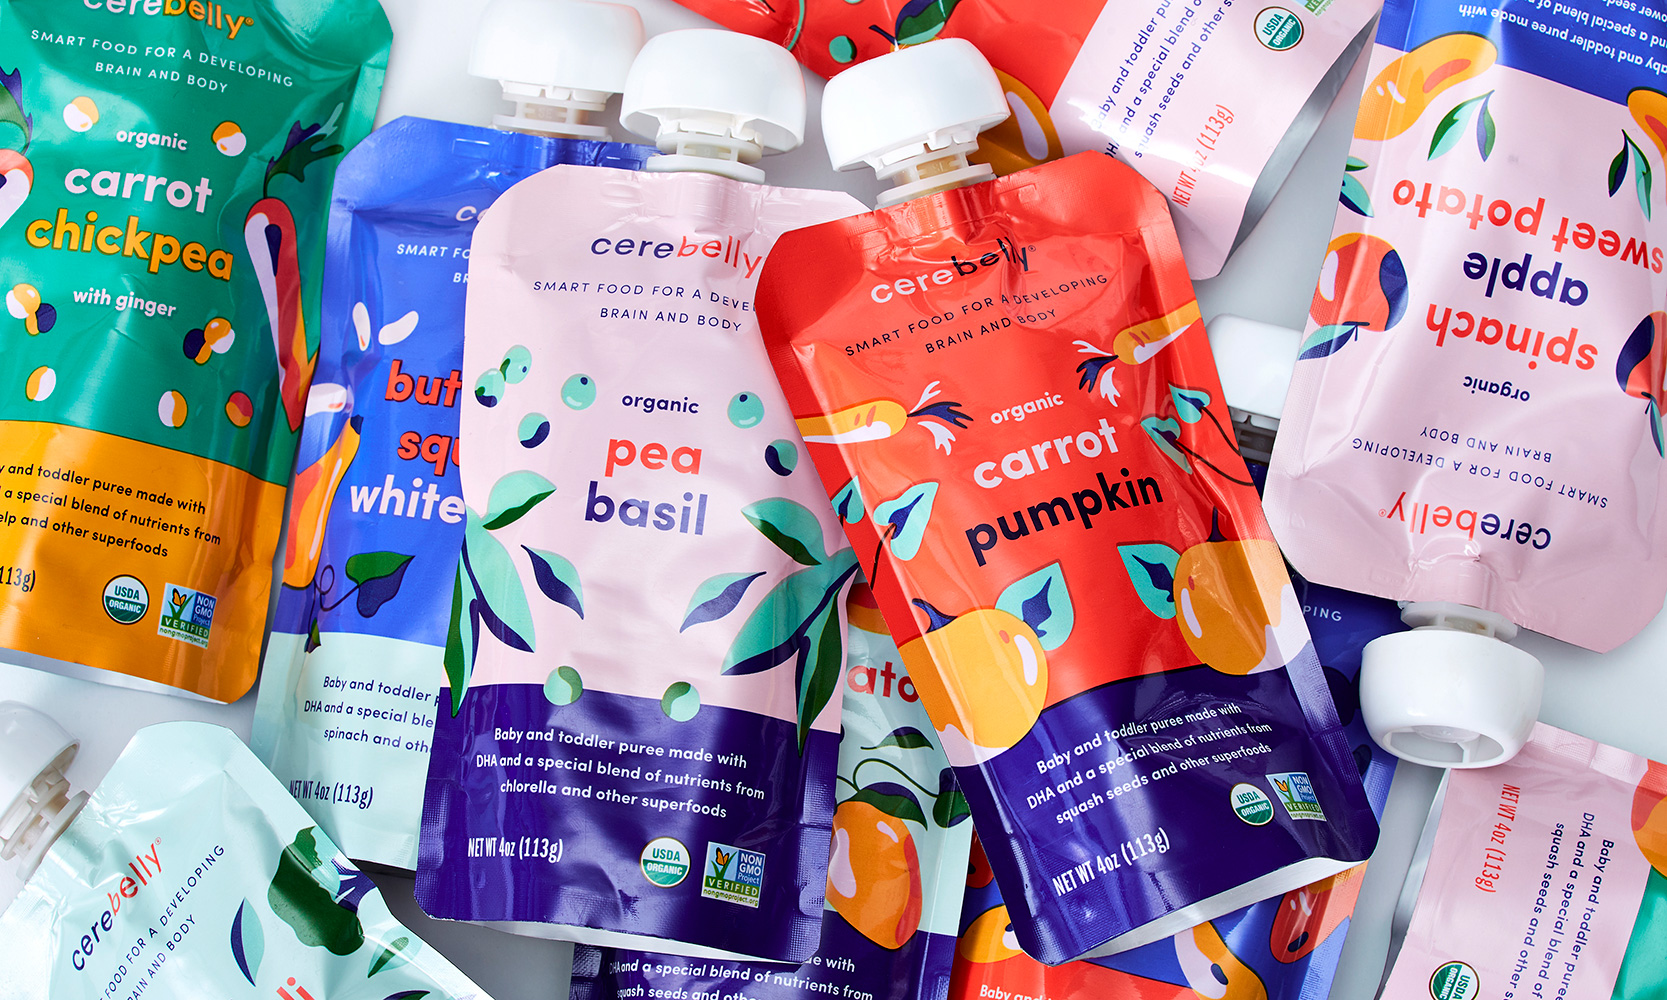 Cerebelly Brings Color and Joy To Baby Food